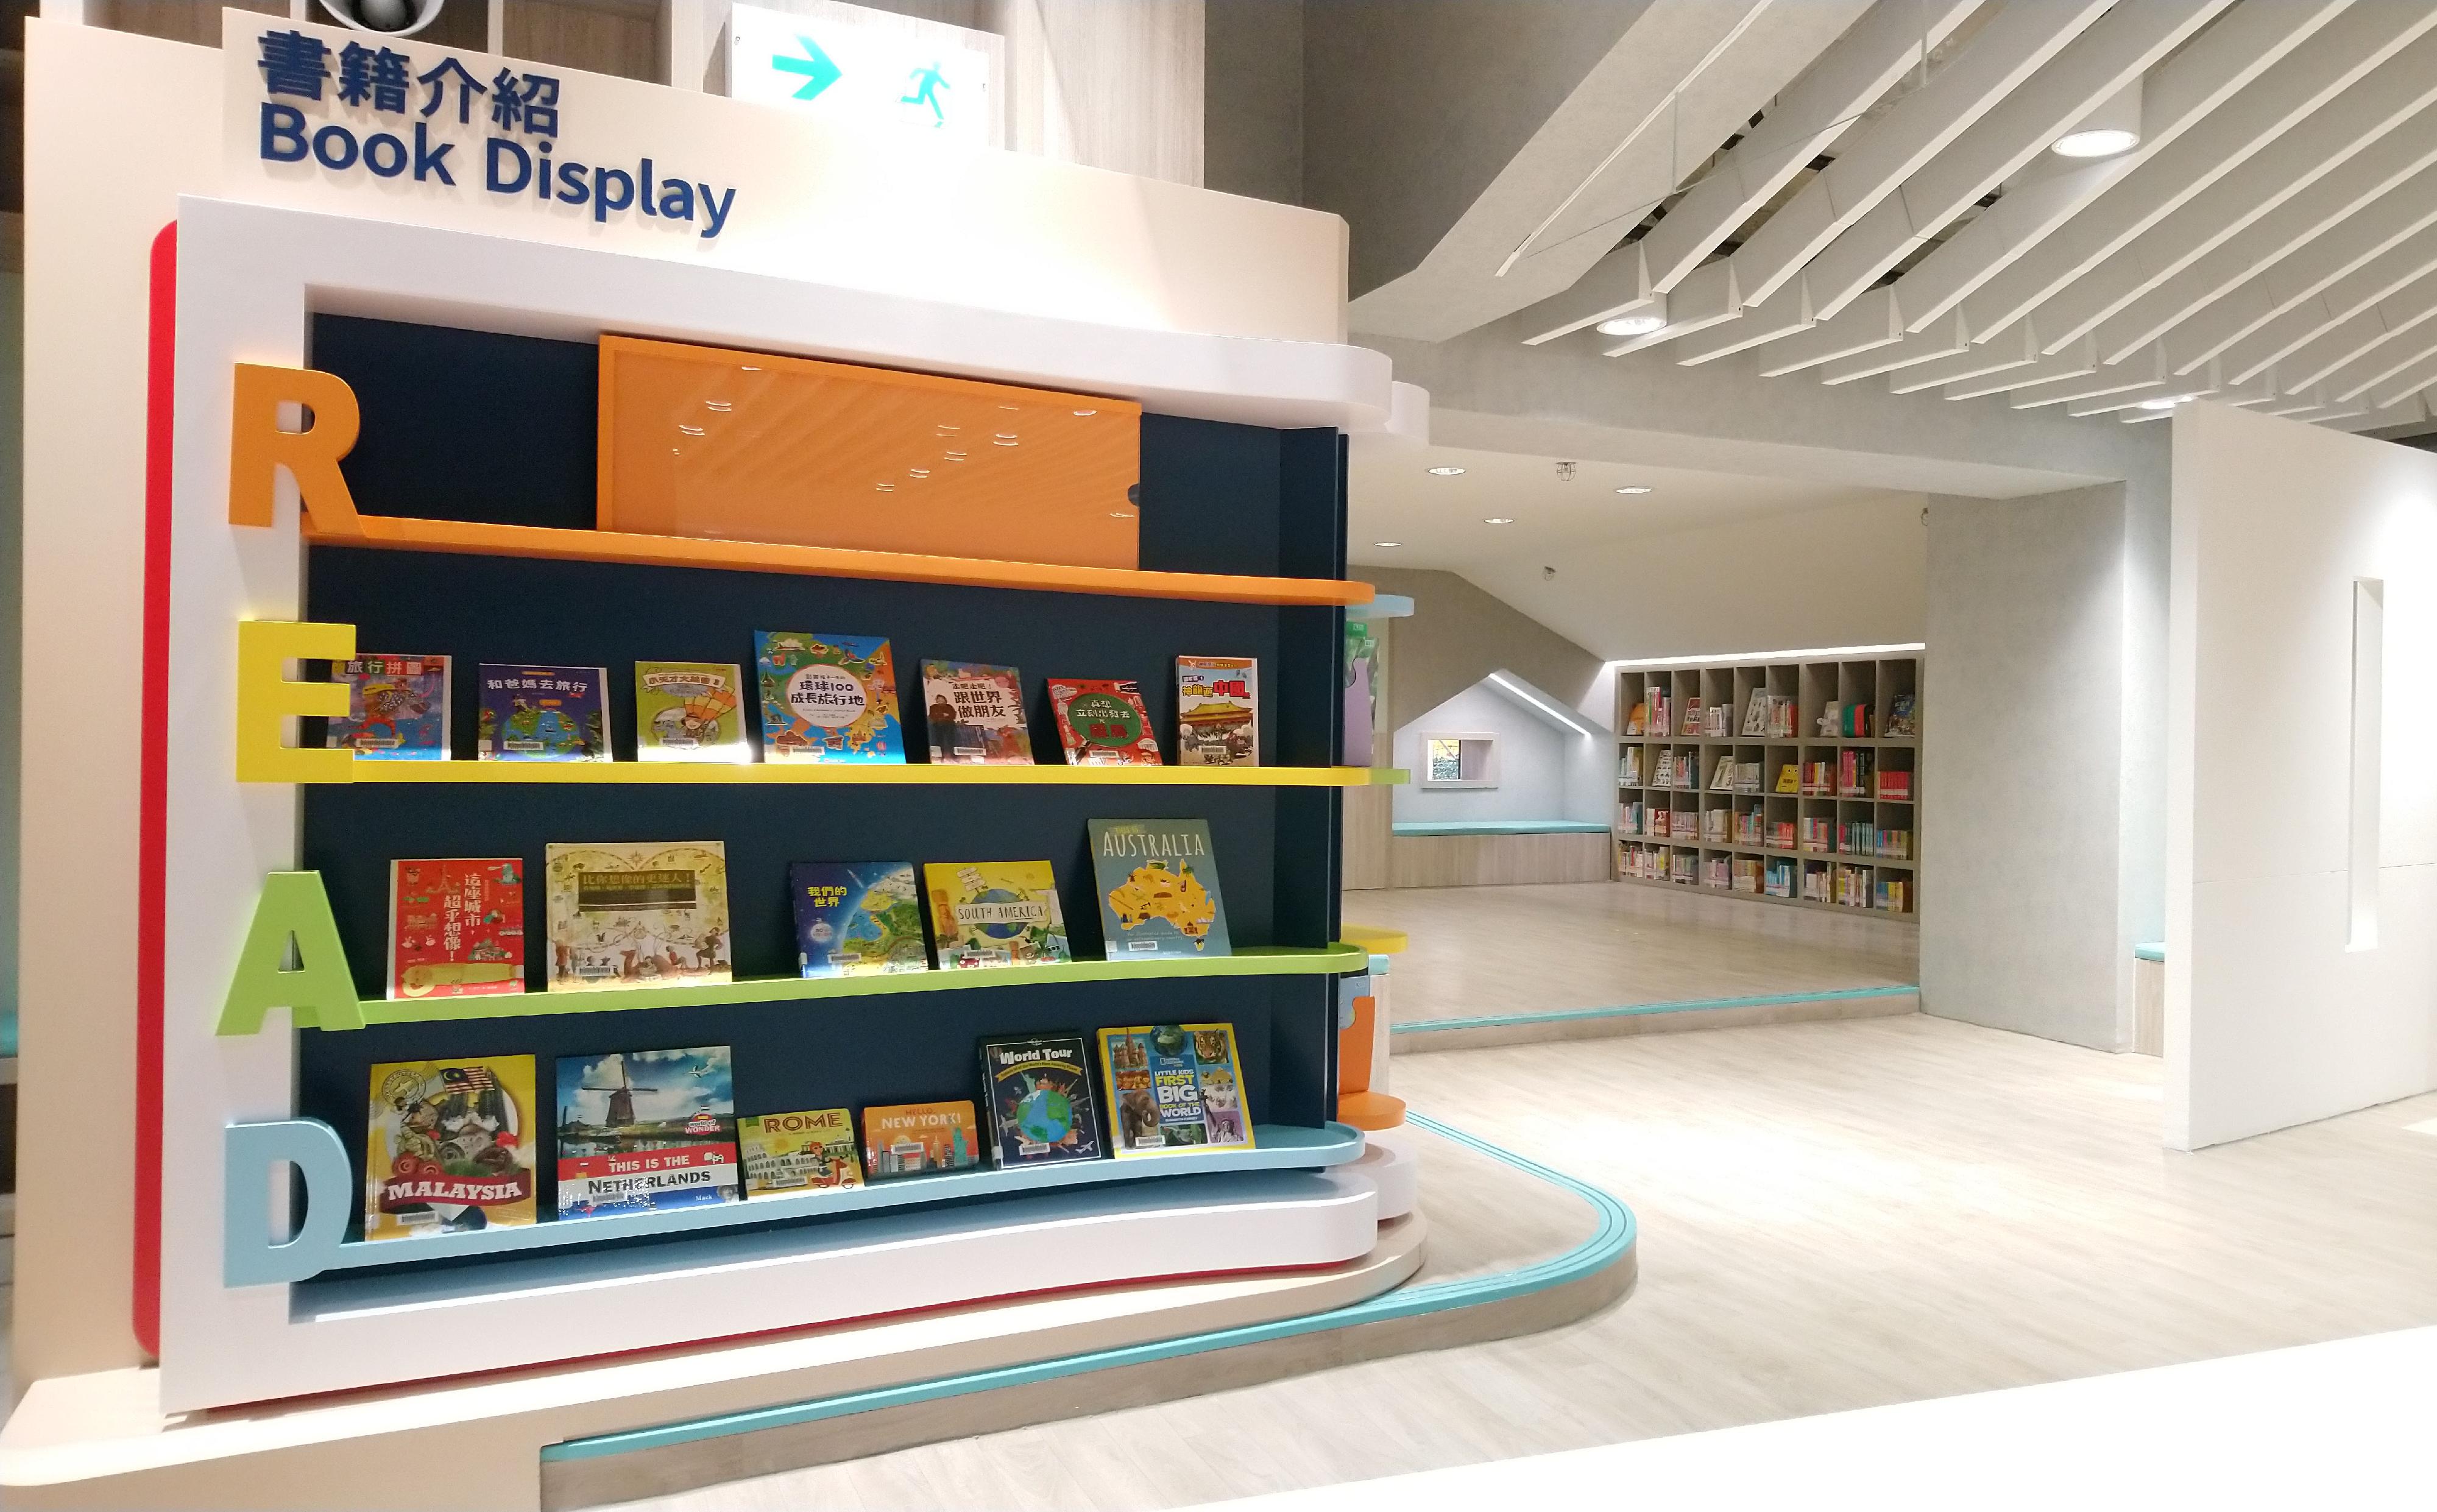 The Sham Shui Po Public Library will come into full operation on March 30 (Thursday). Photo shows the Children’s Library inside the library.